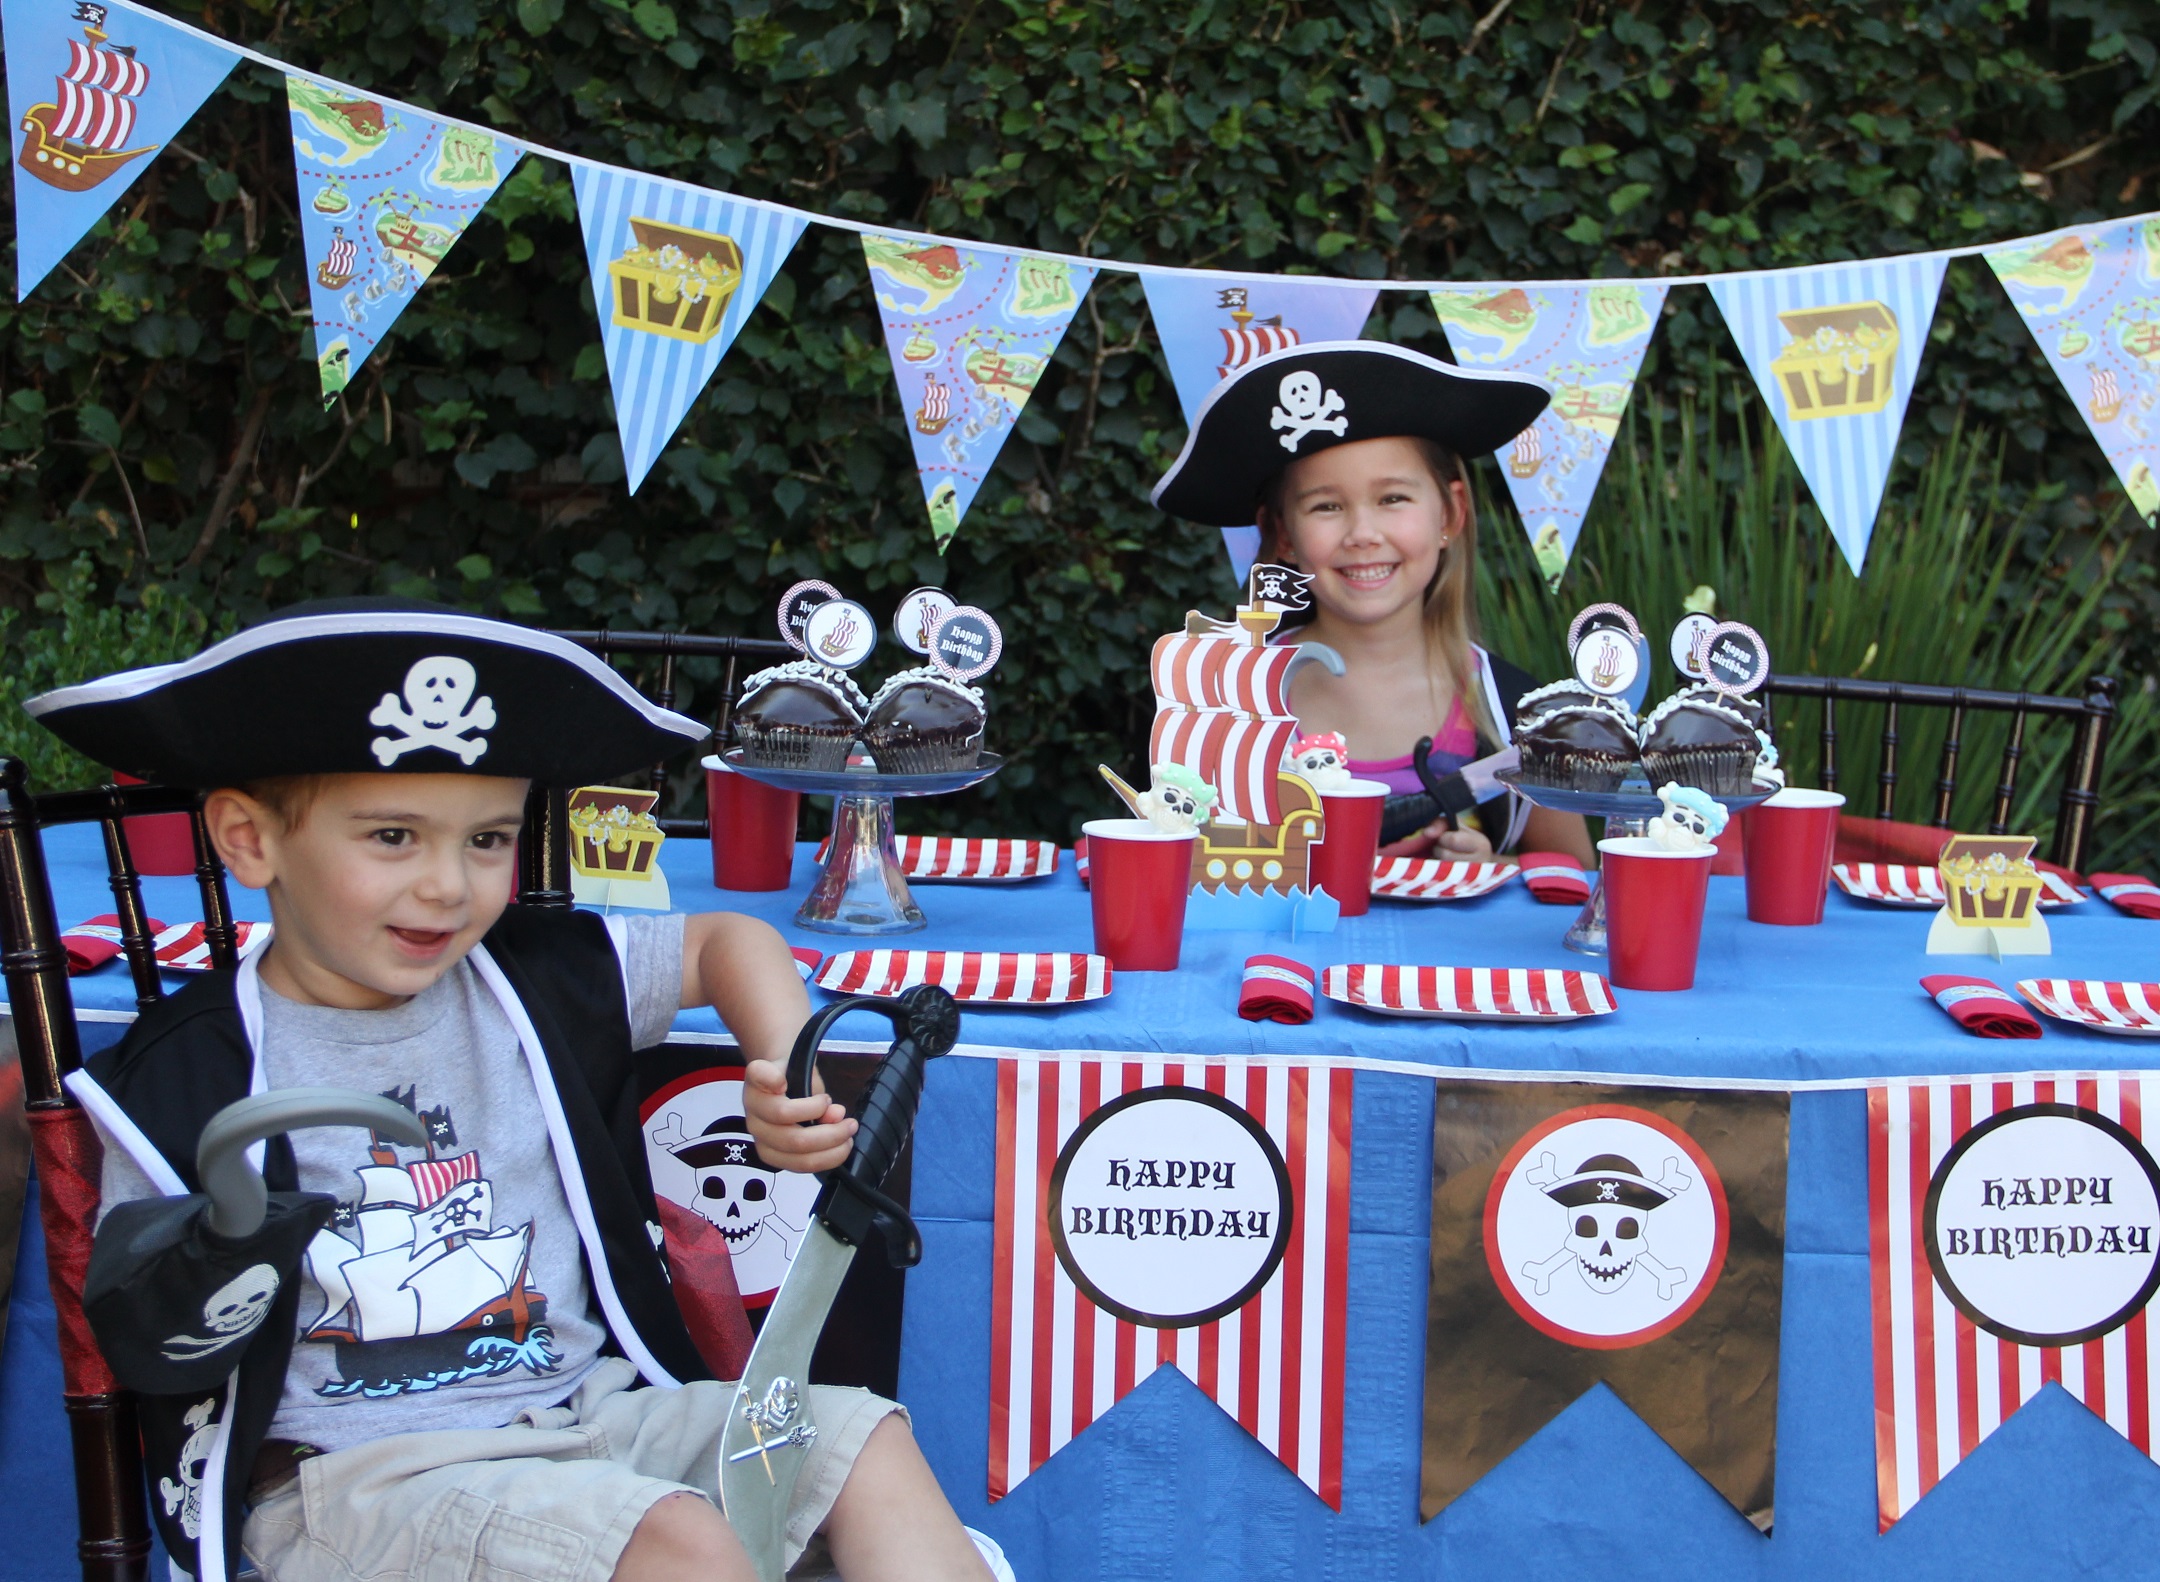 2. 'Pirate' party for boys